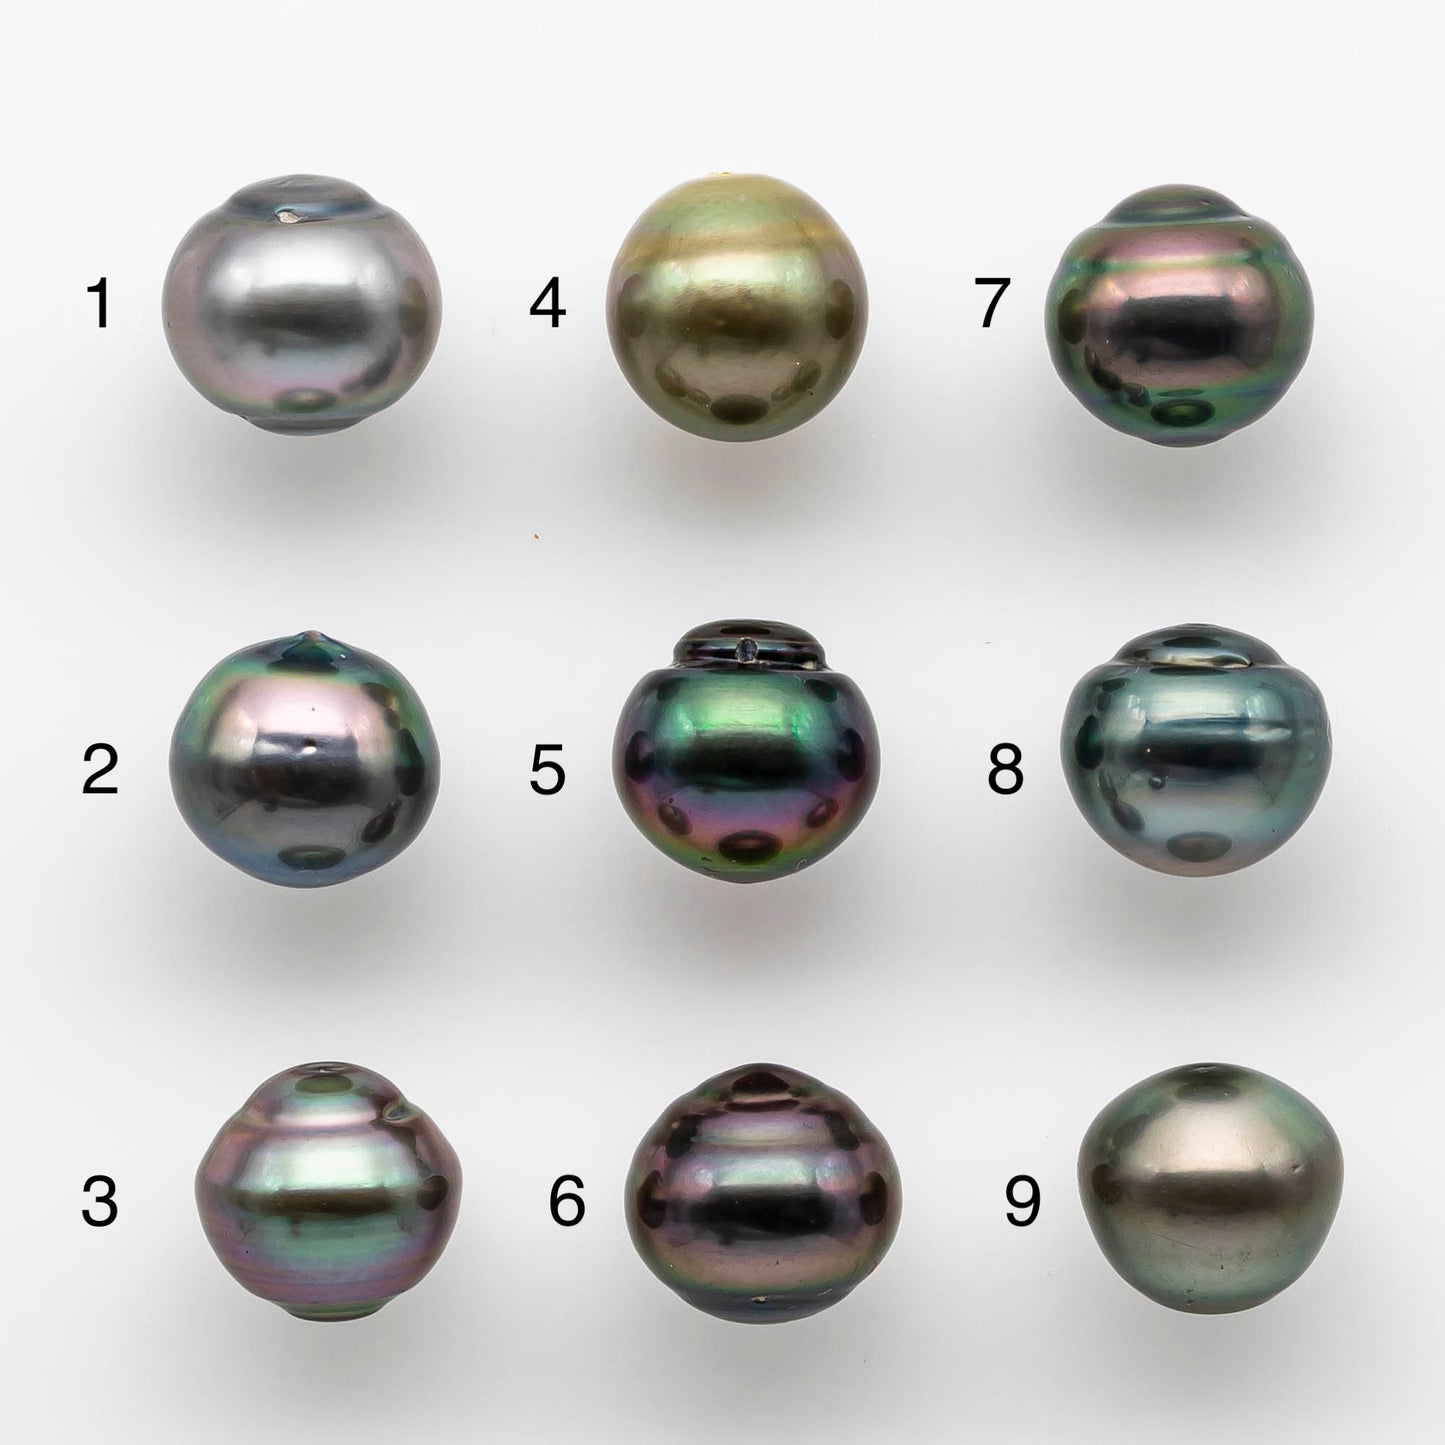 12-13mm Undrilled Drop Tahitian Pearl in High Luster and Natural Color with Minor Blemishes, Loose Single Piece, SKU # 1887TH